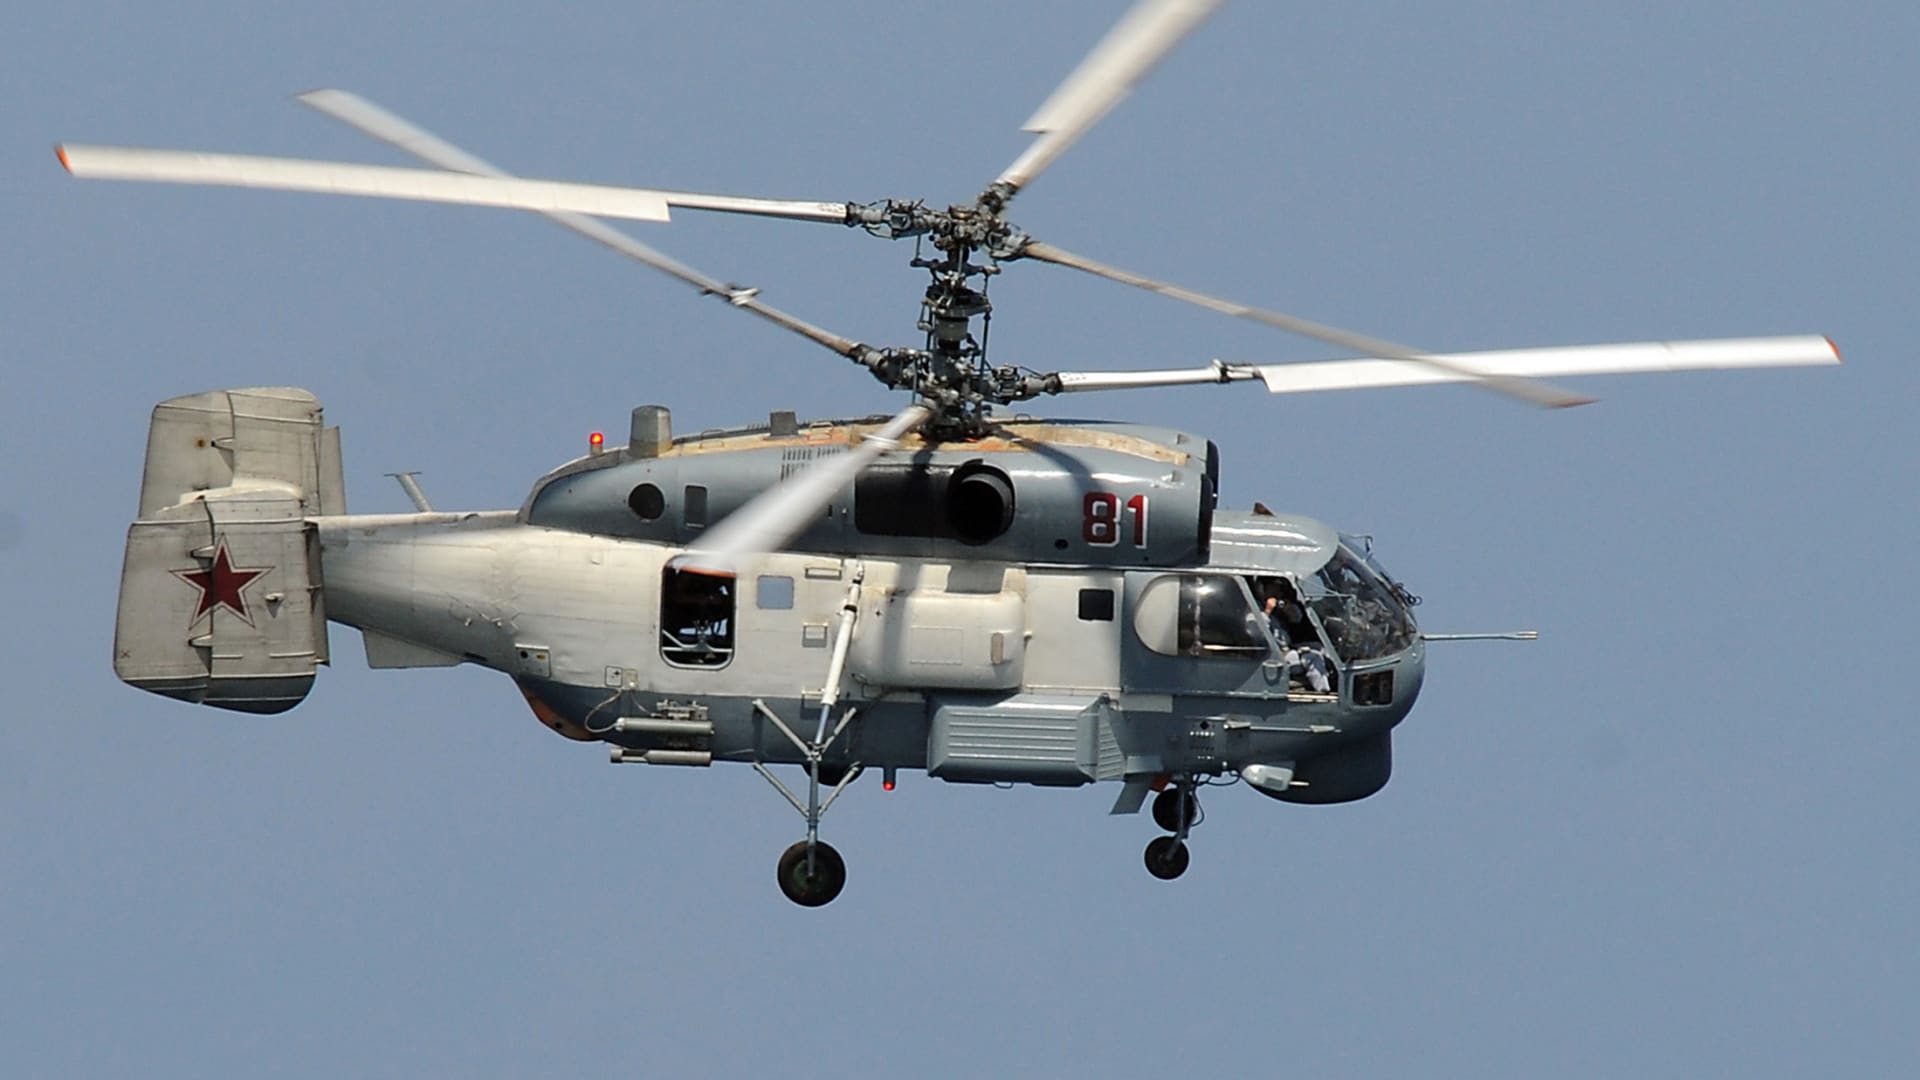 A Russian Helix KA-27 helicopter flies near the guided-missile cruiser USS Vella Gulf while conducting operations in the Gulf of Aden, in this U.S. Navy picture taken Feb. 9, 2009.